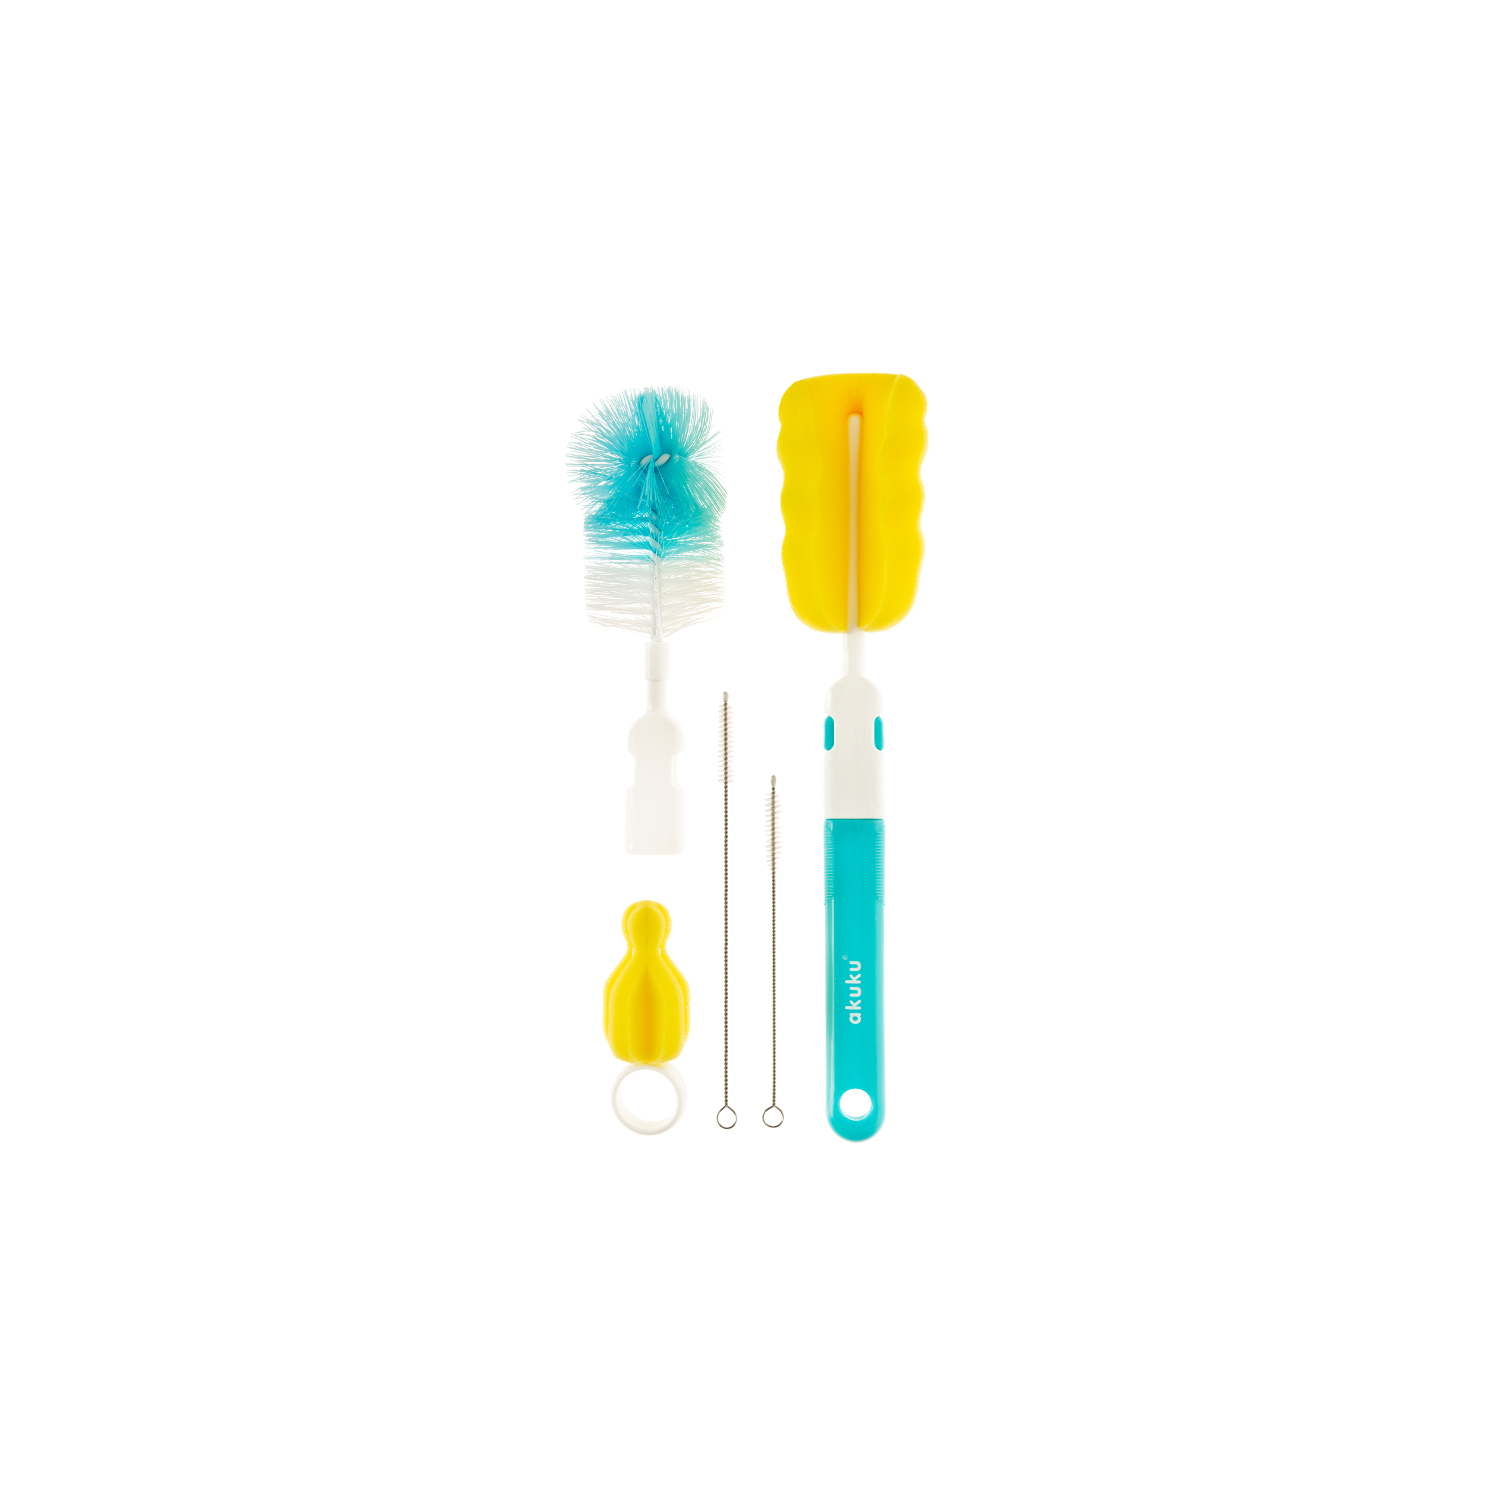 A set of bottle and teats brushes A0410